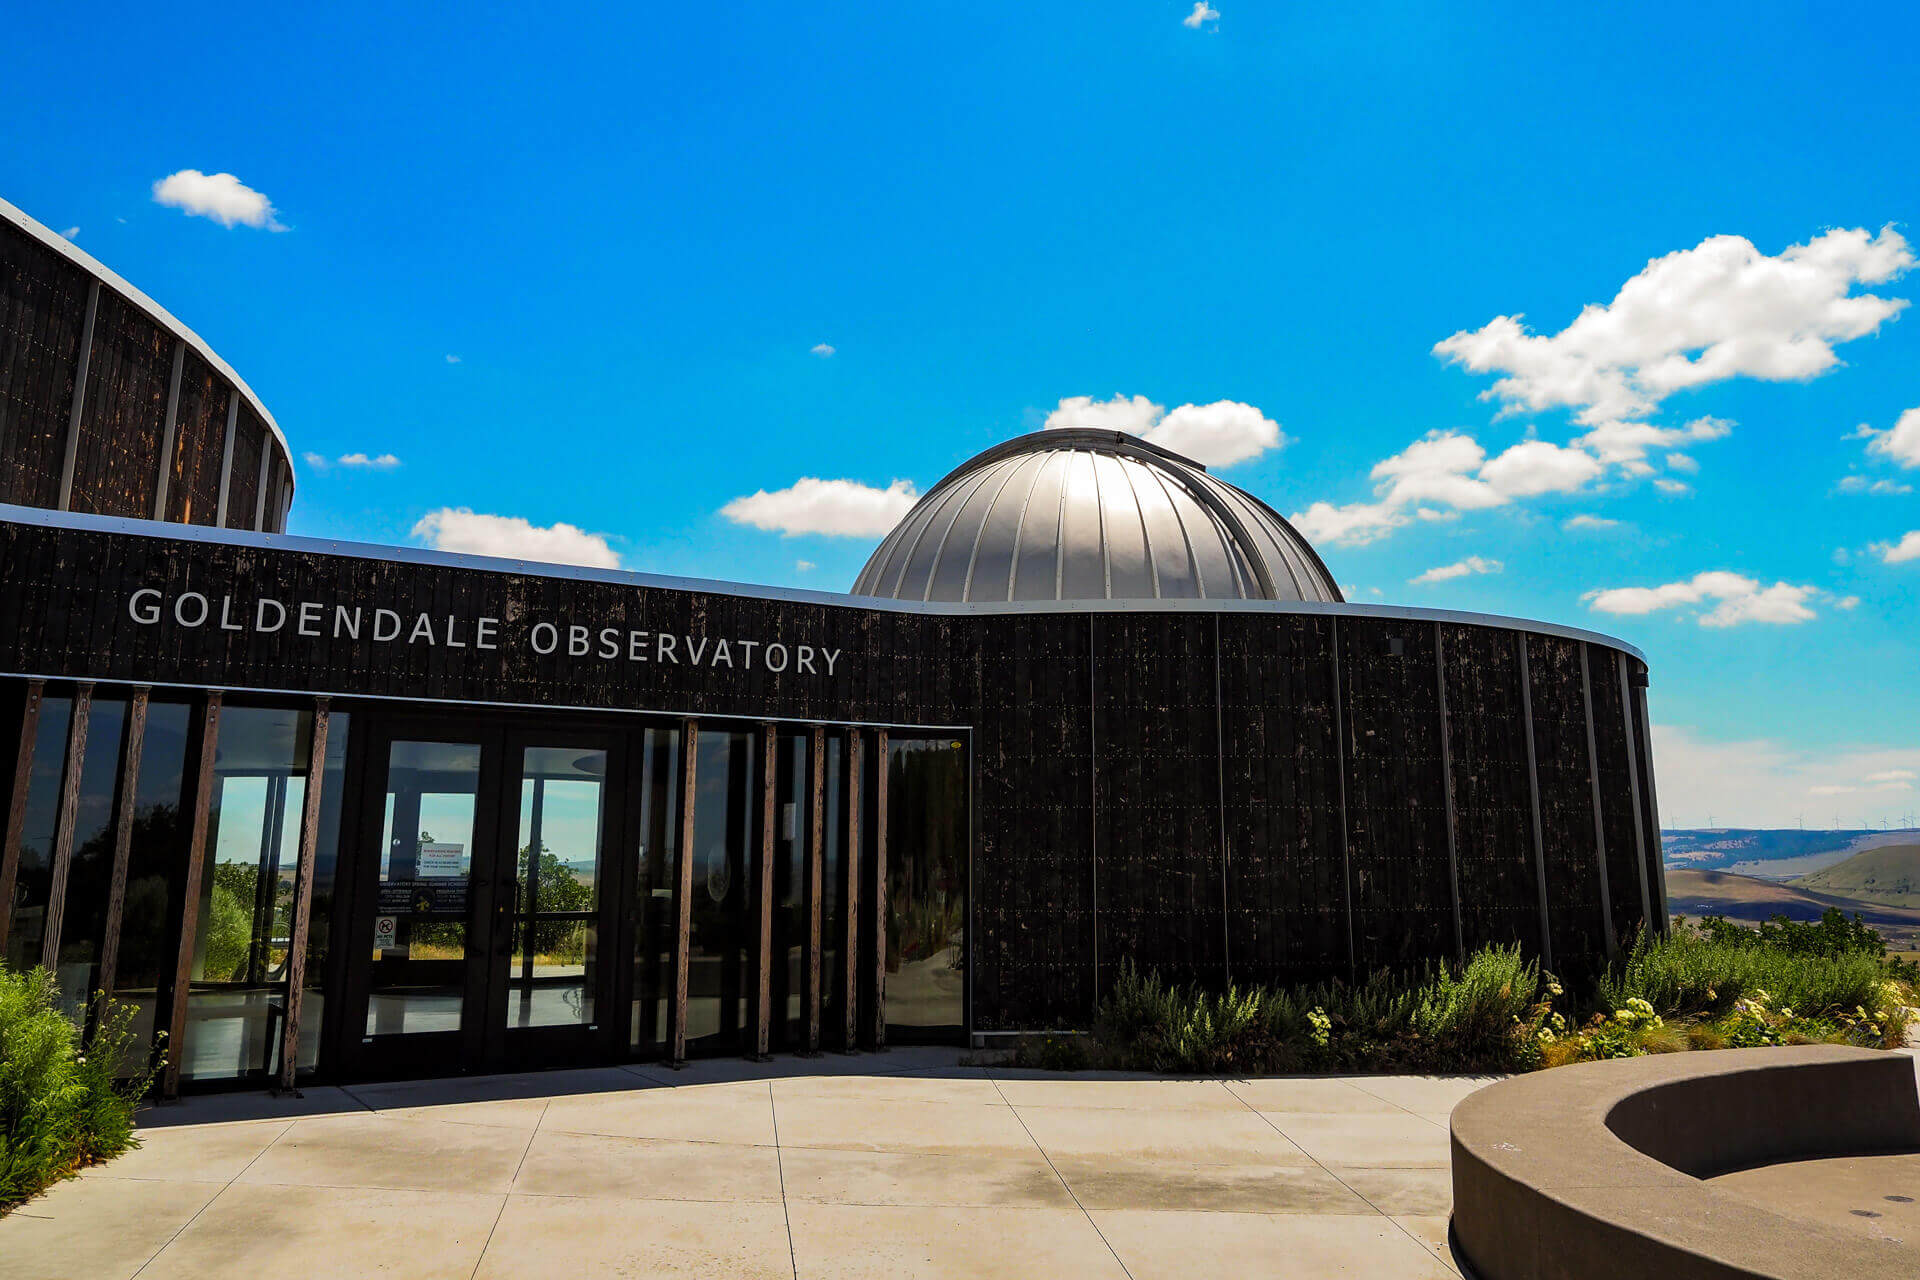 the Goldendale Observatory